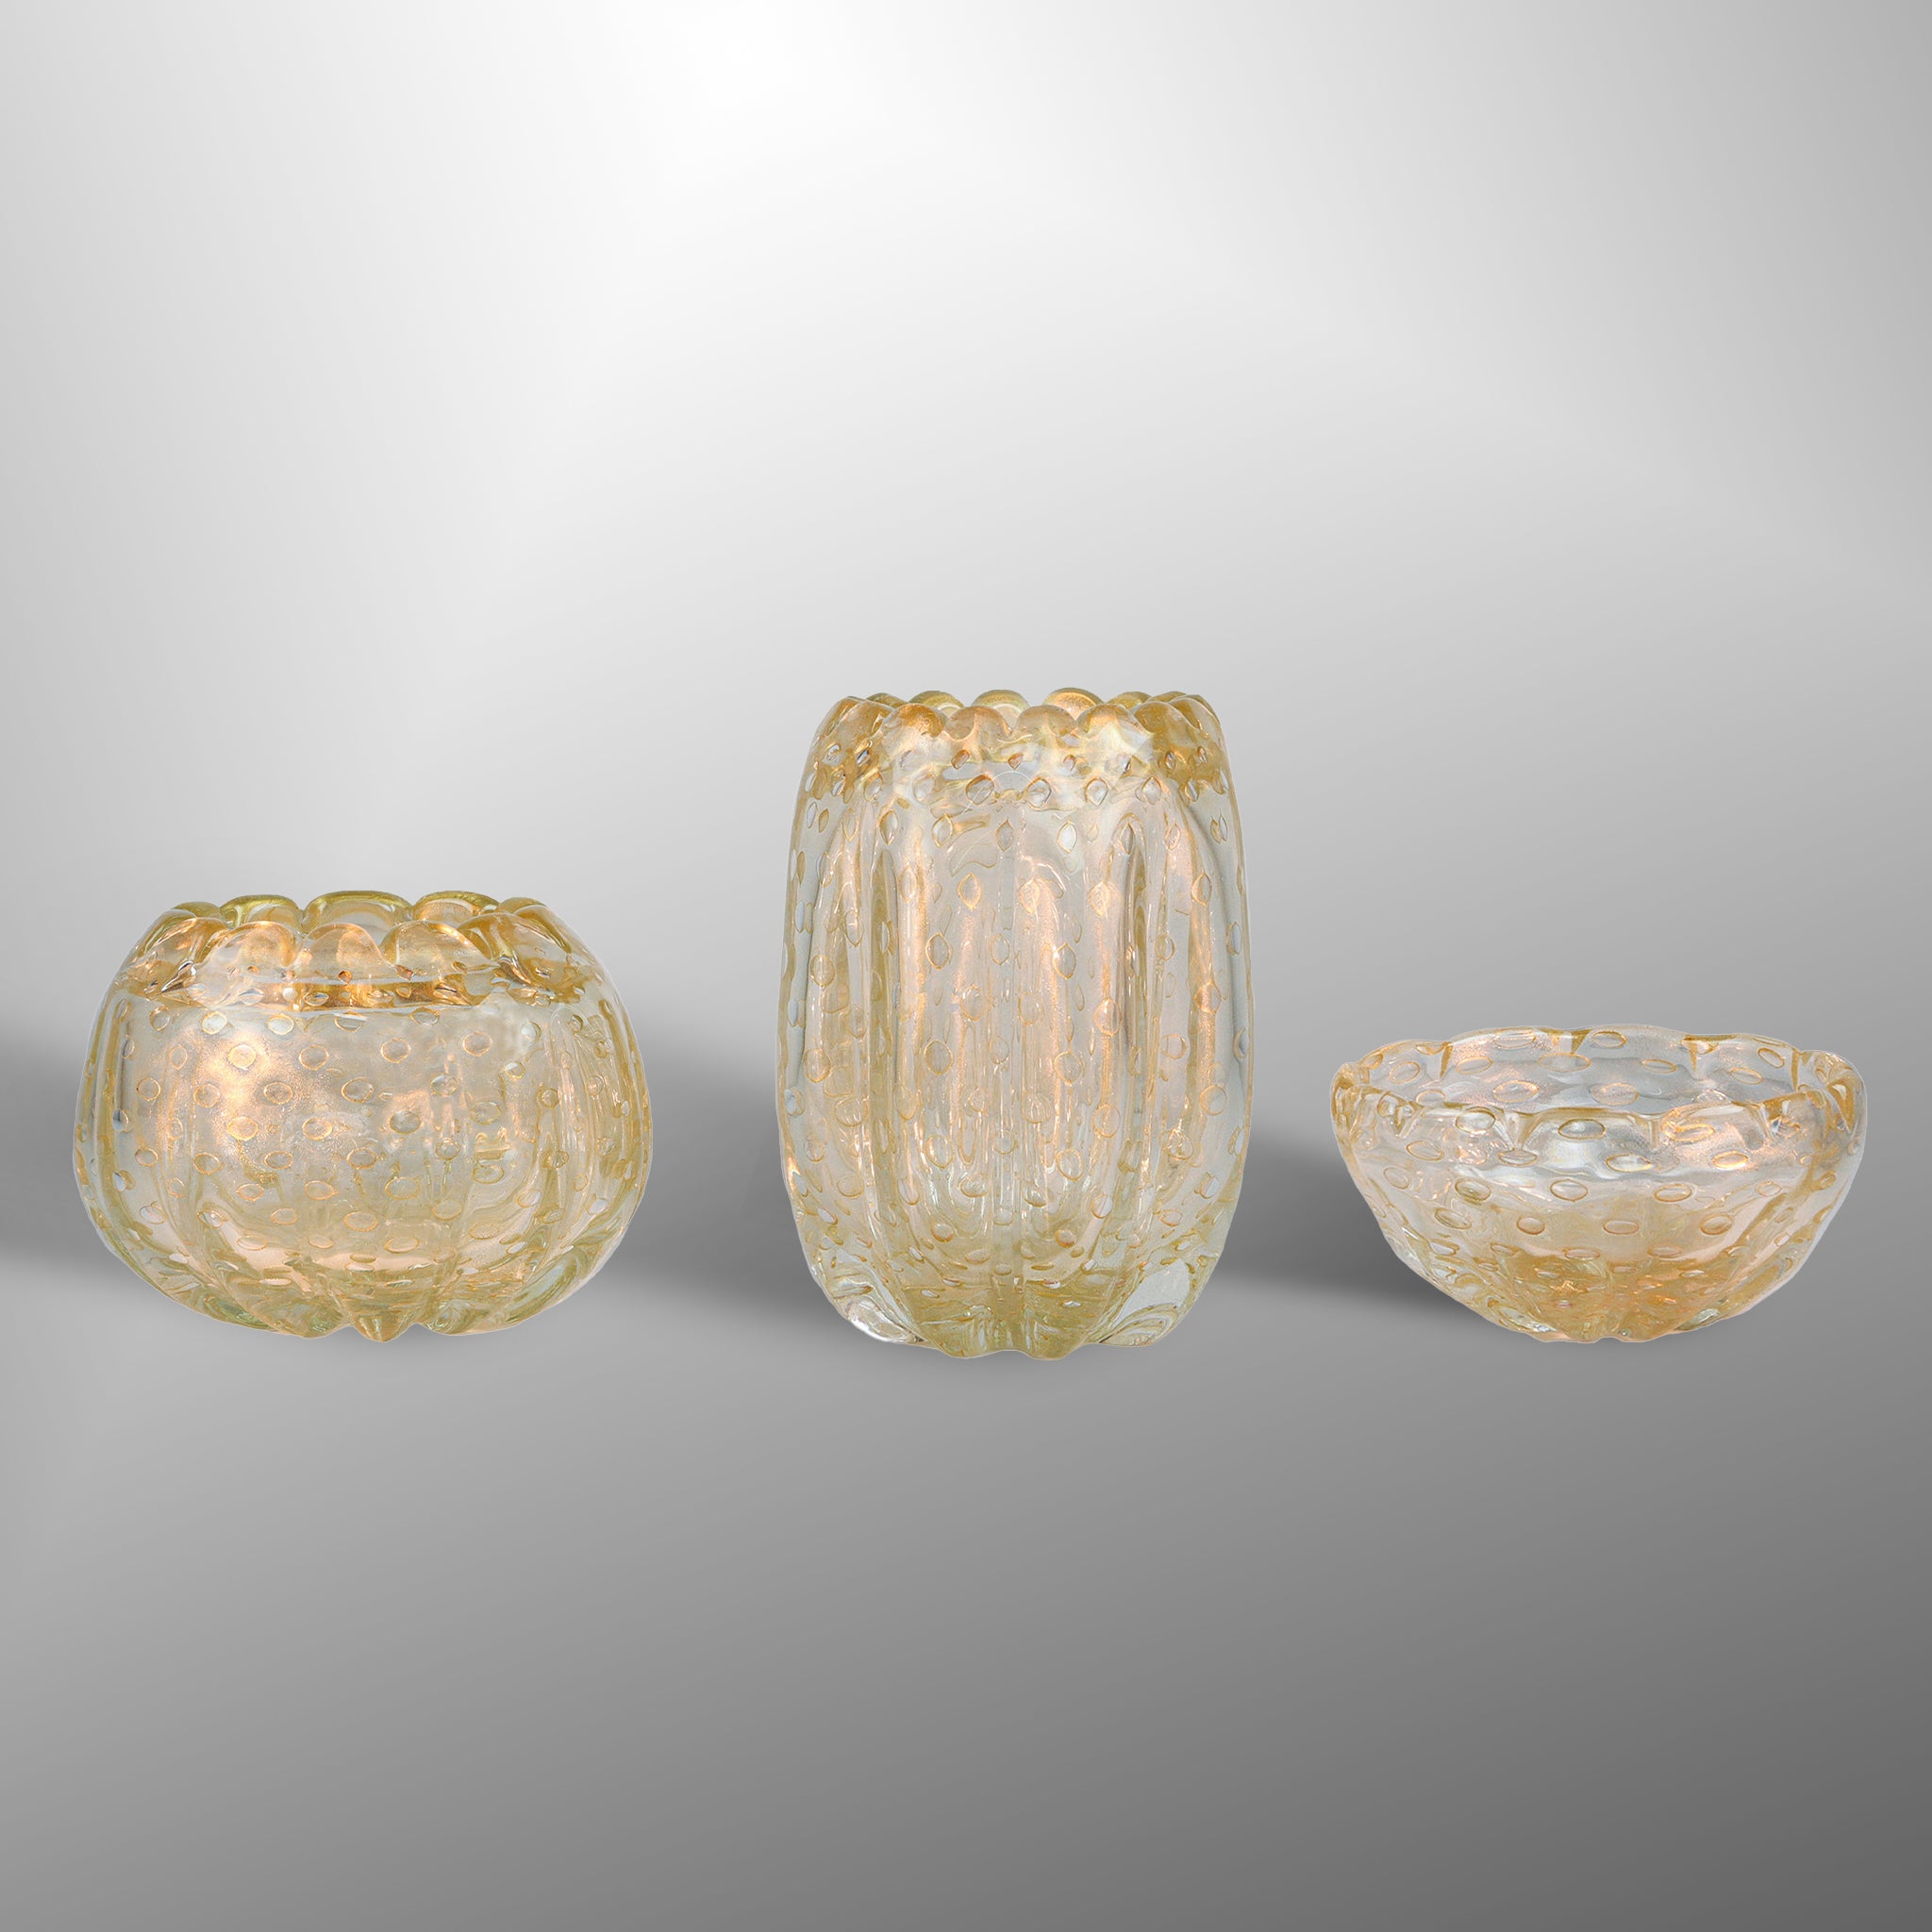 Vases in gold with "Bolle" workmanship